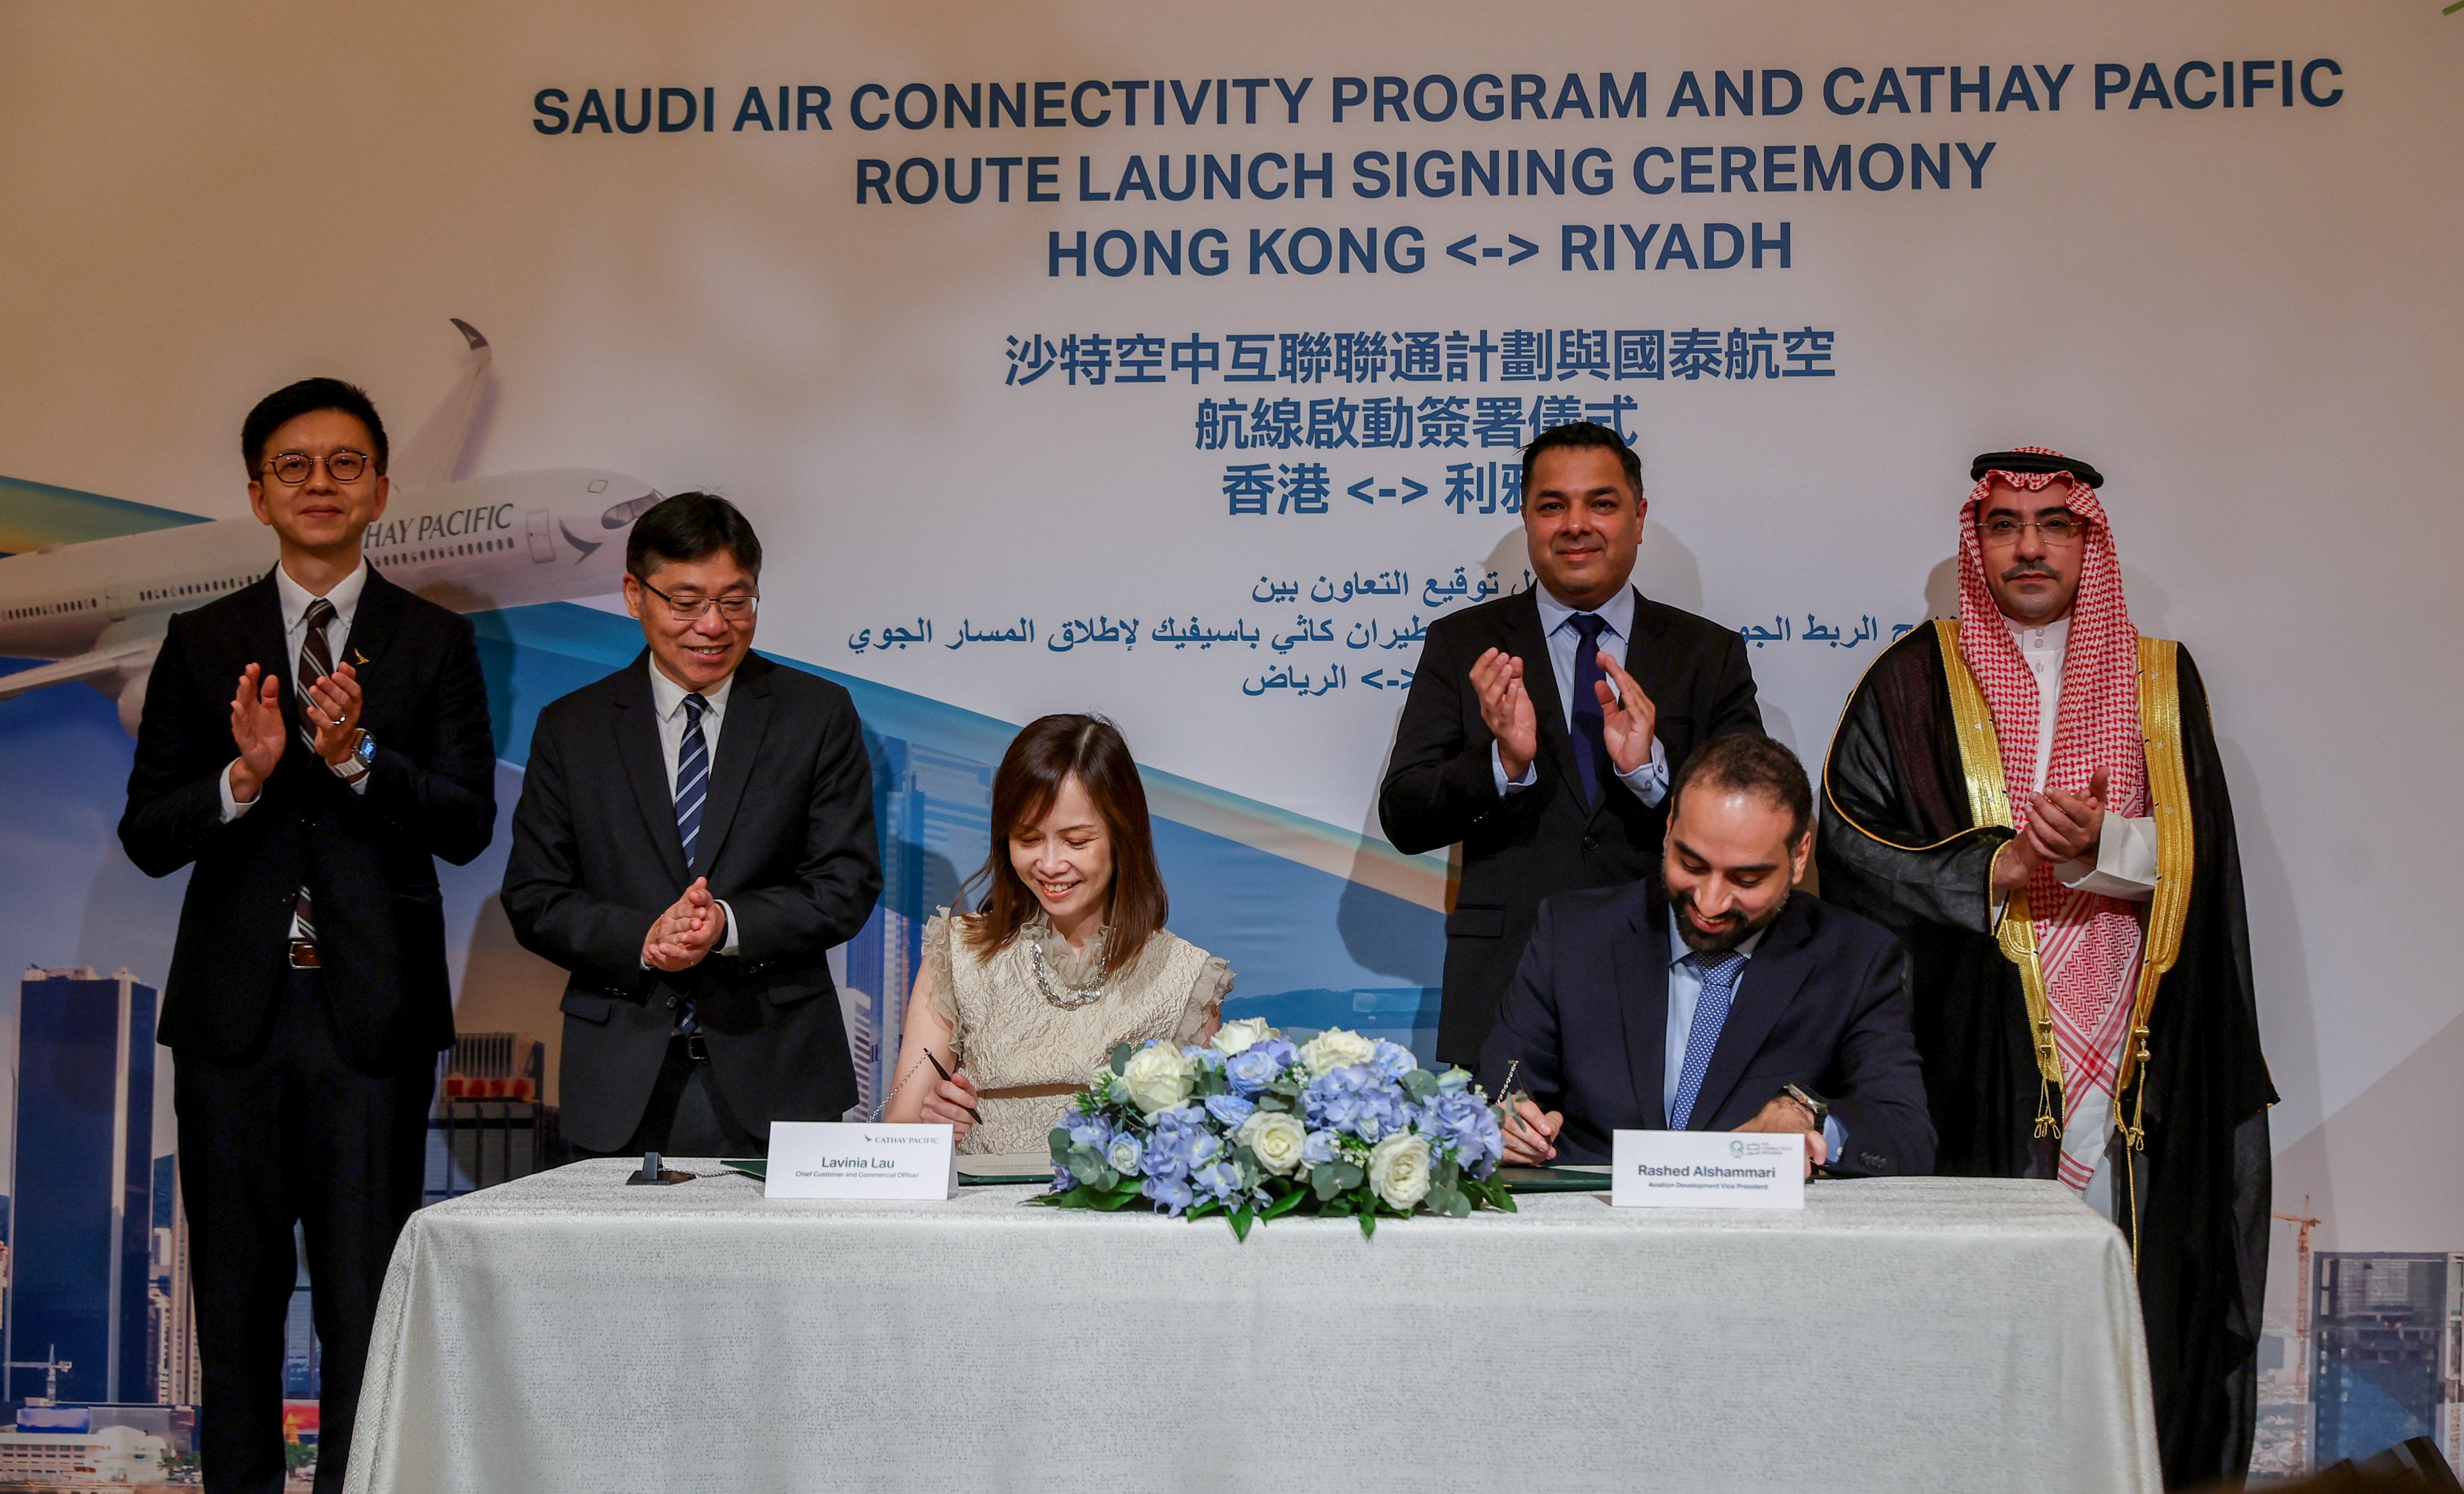 The signing ceremony for the route launch between the Saudi Air Connectivity Program and Cathay Pacific takes place at The Peninsula in Tsim Sha Tsui. Photo: Edmond So